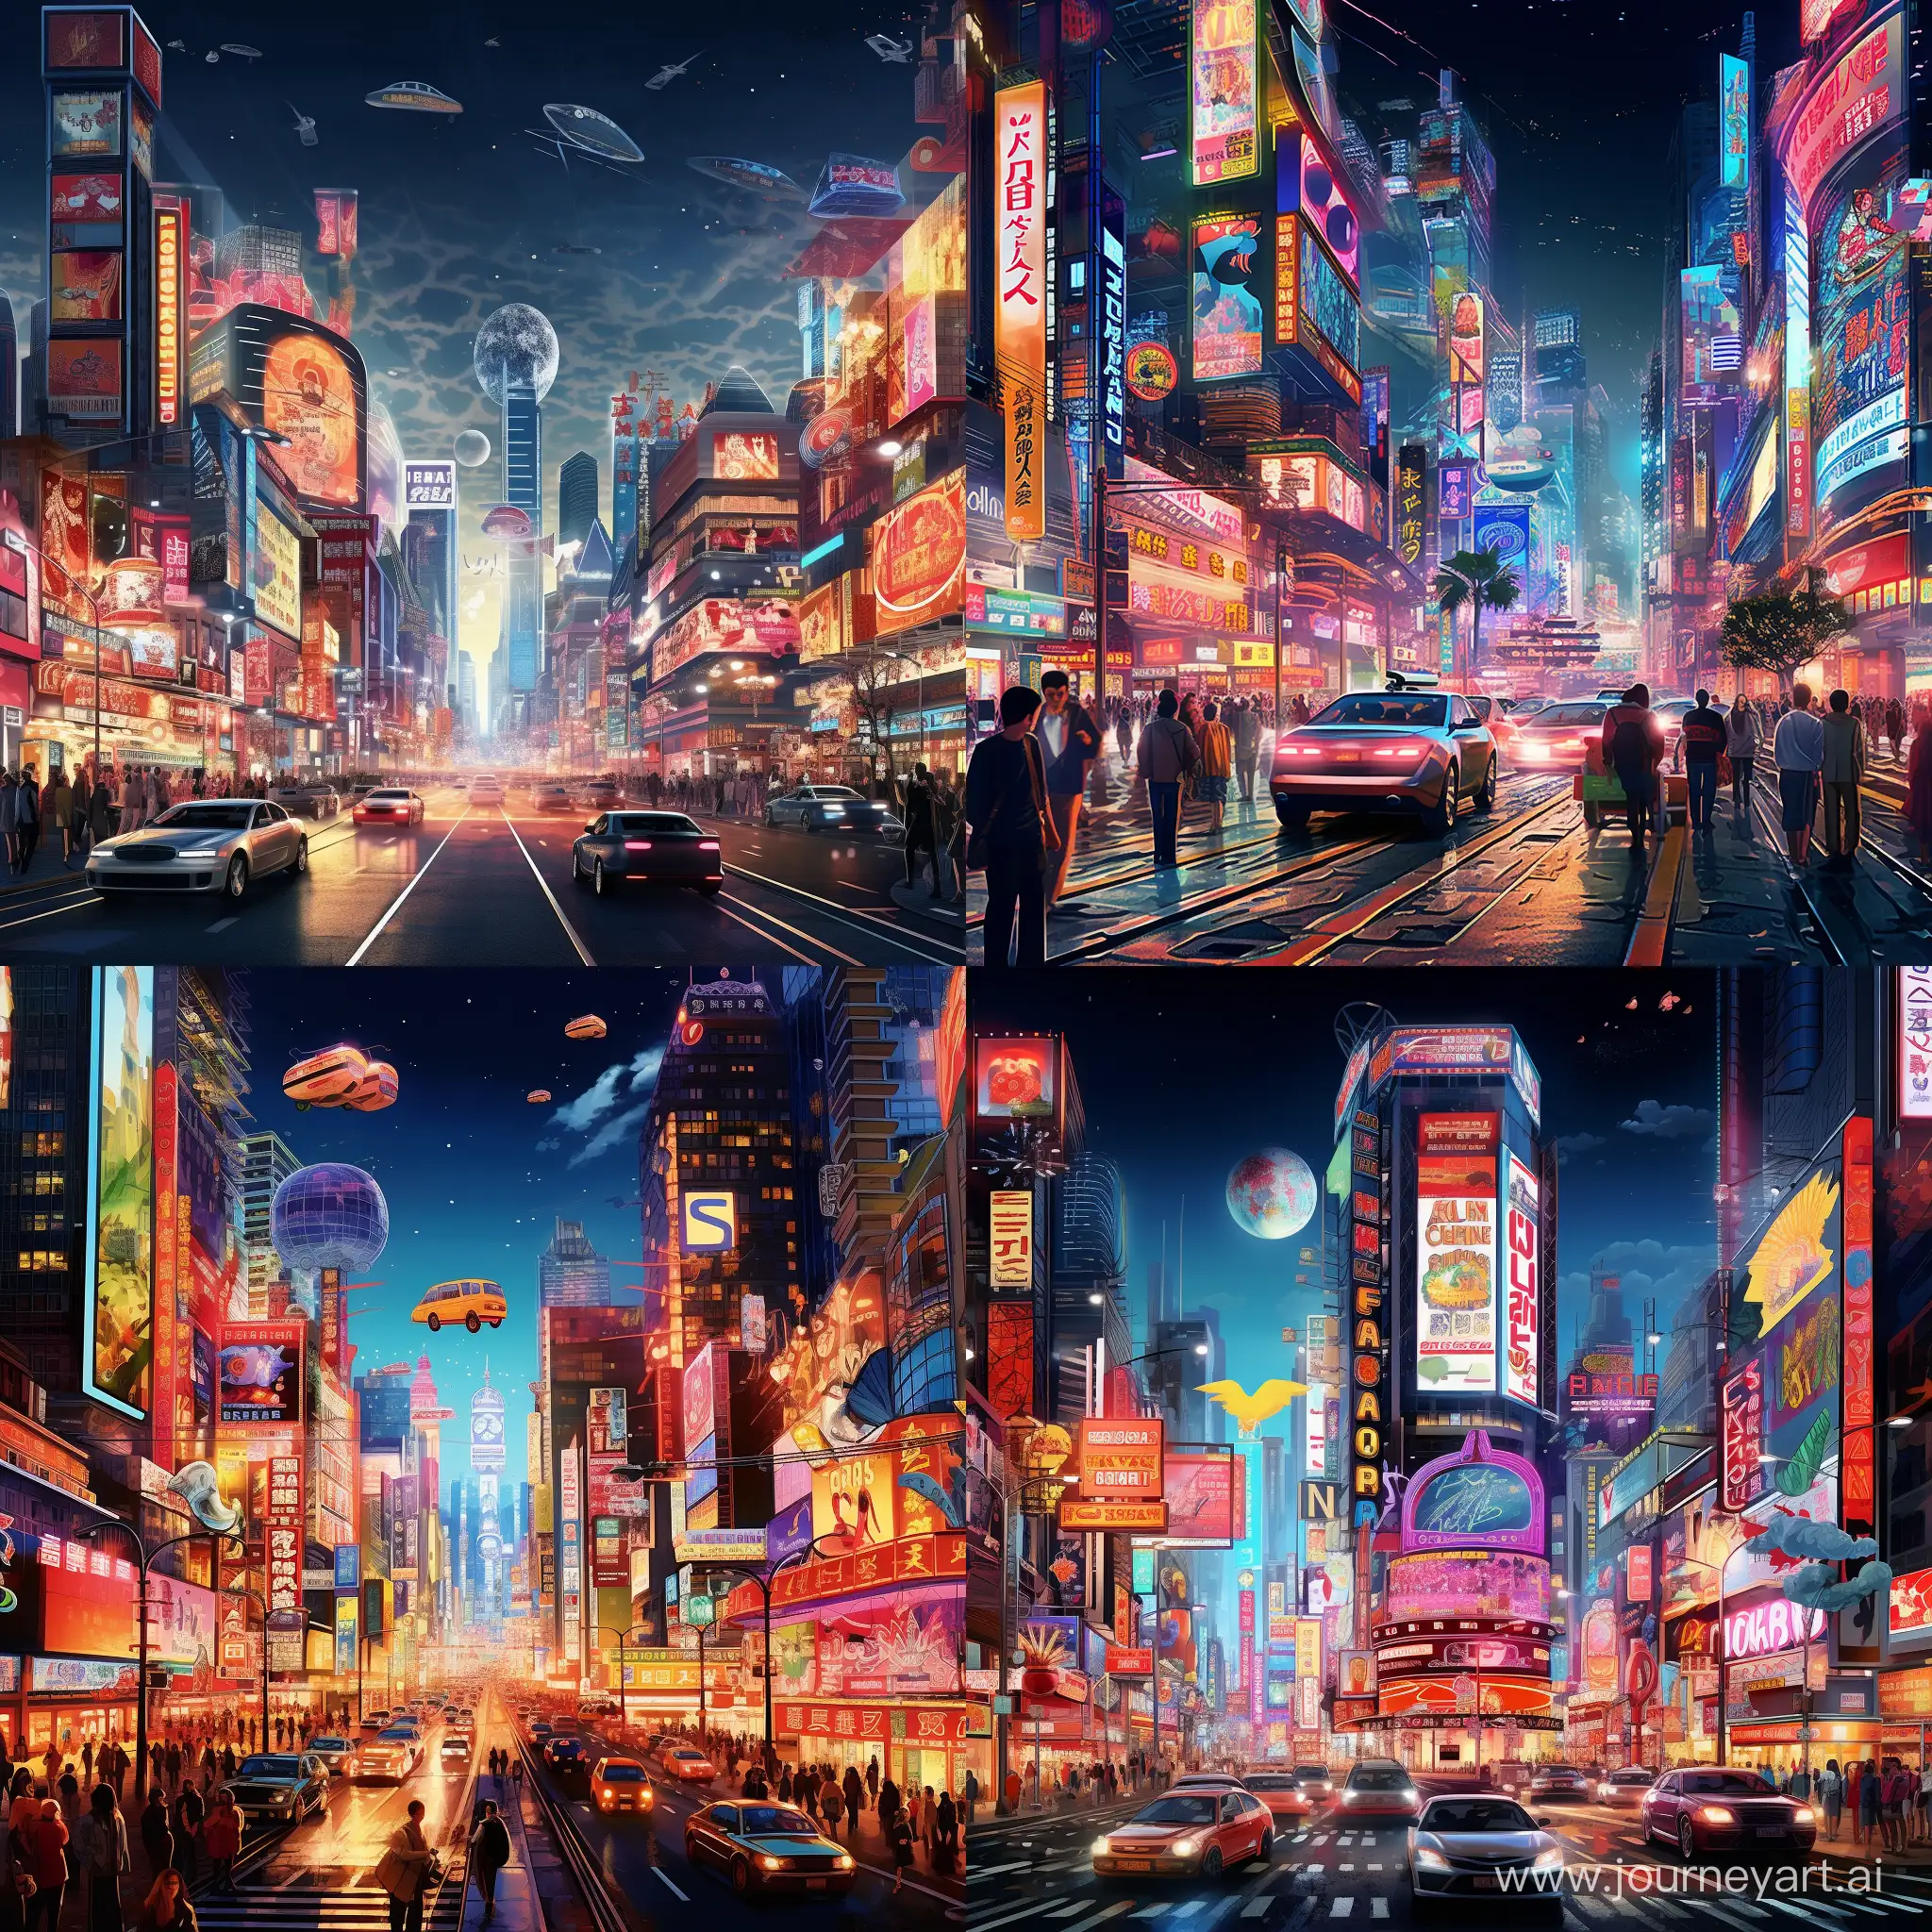  (futuristic city:1.5), flying cars on the road, (traffic:1.3), high-rise buildings, neon lights, bustling streets, people in the distance, full scene, medium shot
